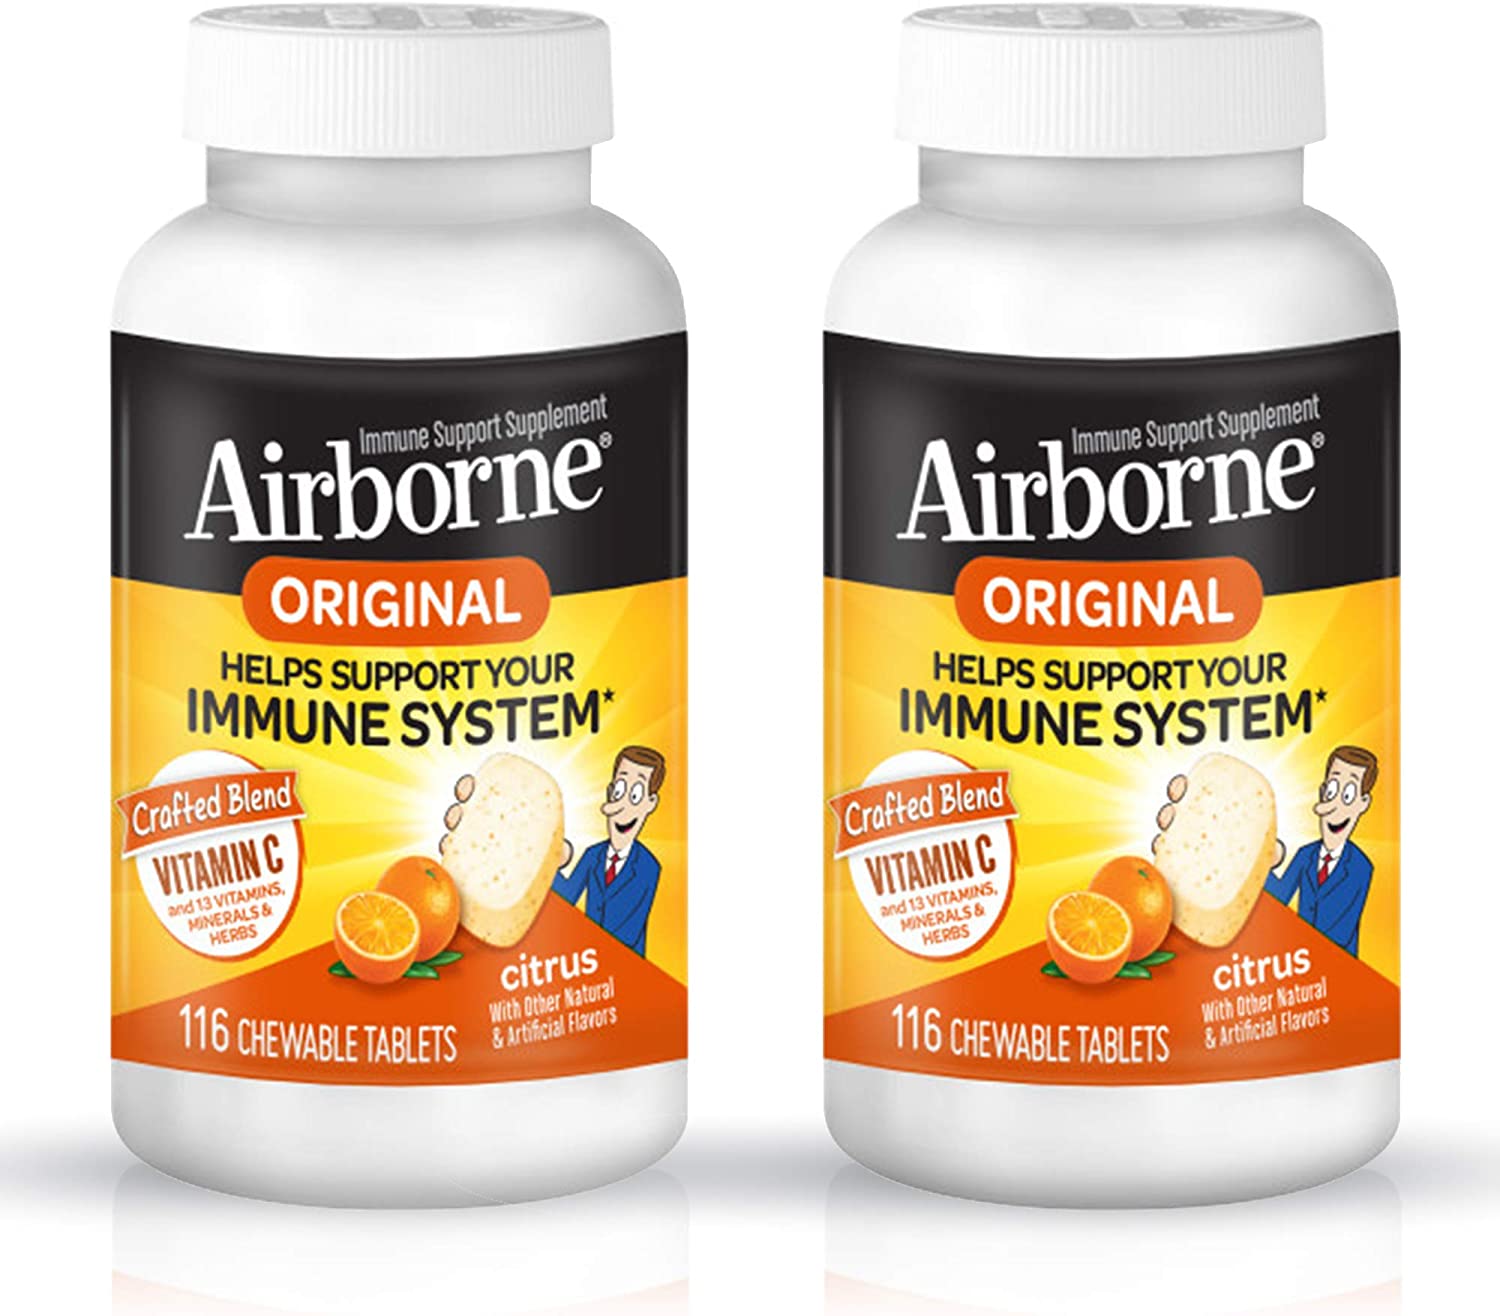 Airborne Citrus Chewable Tablets (116ct), Vitamin C 1000mg (per Serving), Gluten-Free Immune Support Supplement, with Vitamins A C E, ZINC, Selenium, Echinacea & Ginger, Antioxidants (Pack of 2)